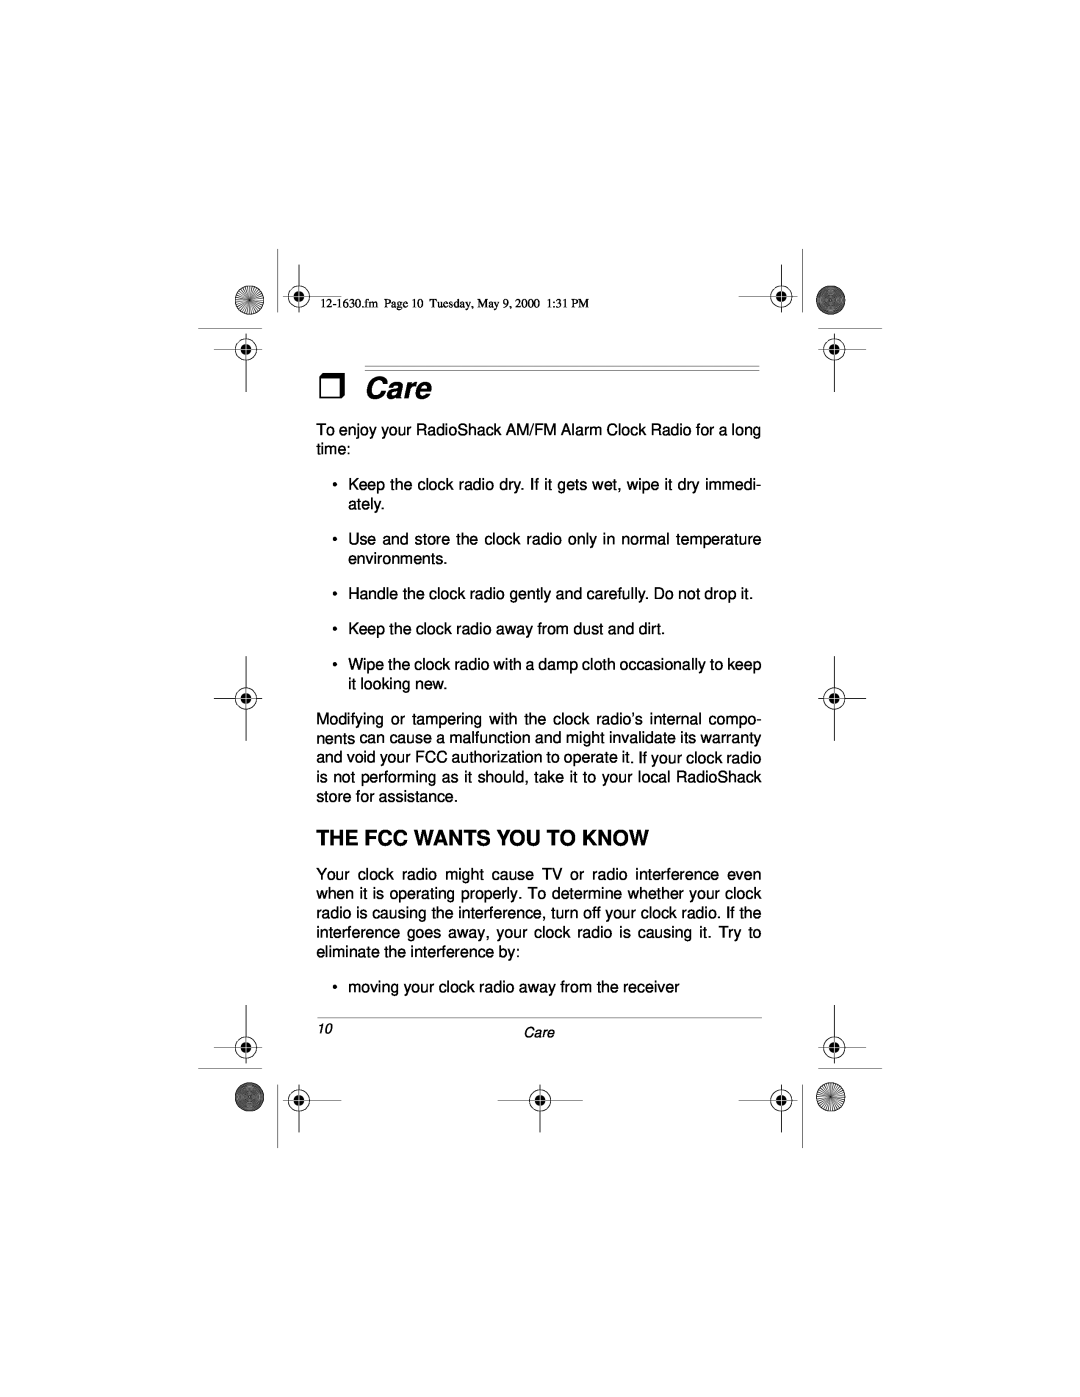 Radio Shack 12-1630 owner manual ˆ Care, The Fcc Wants You To Know 